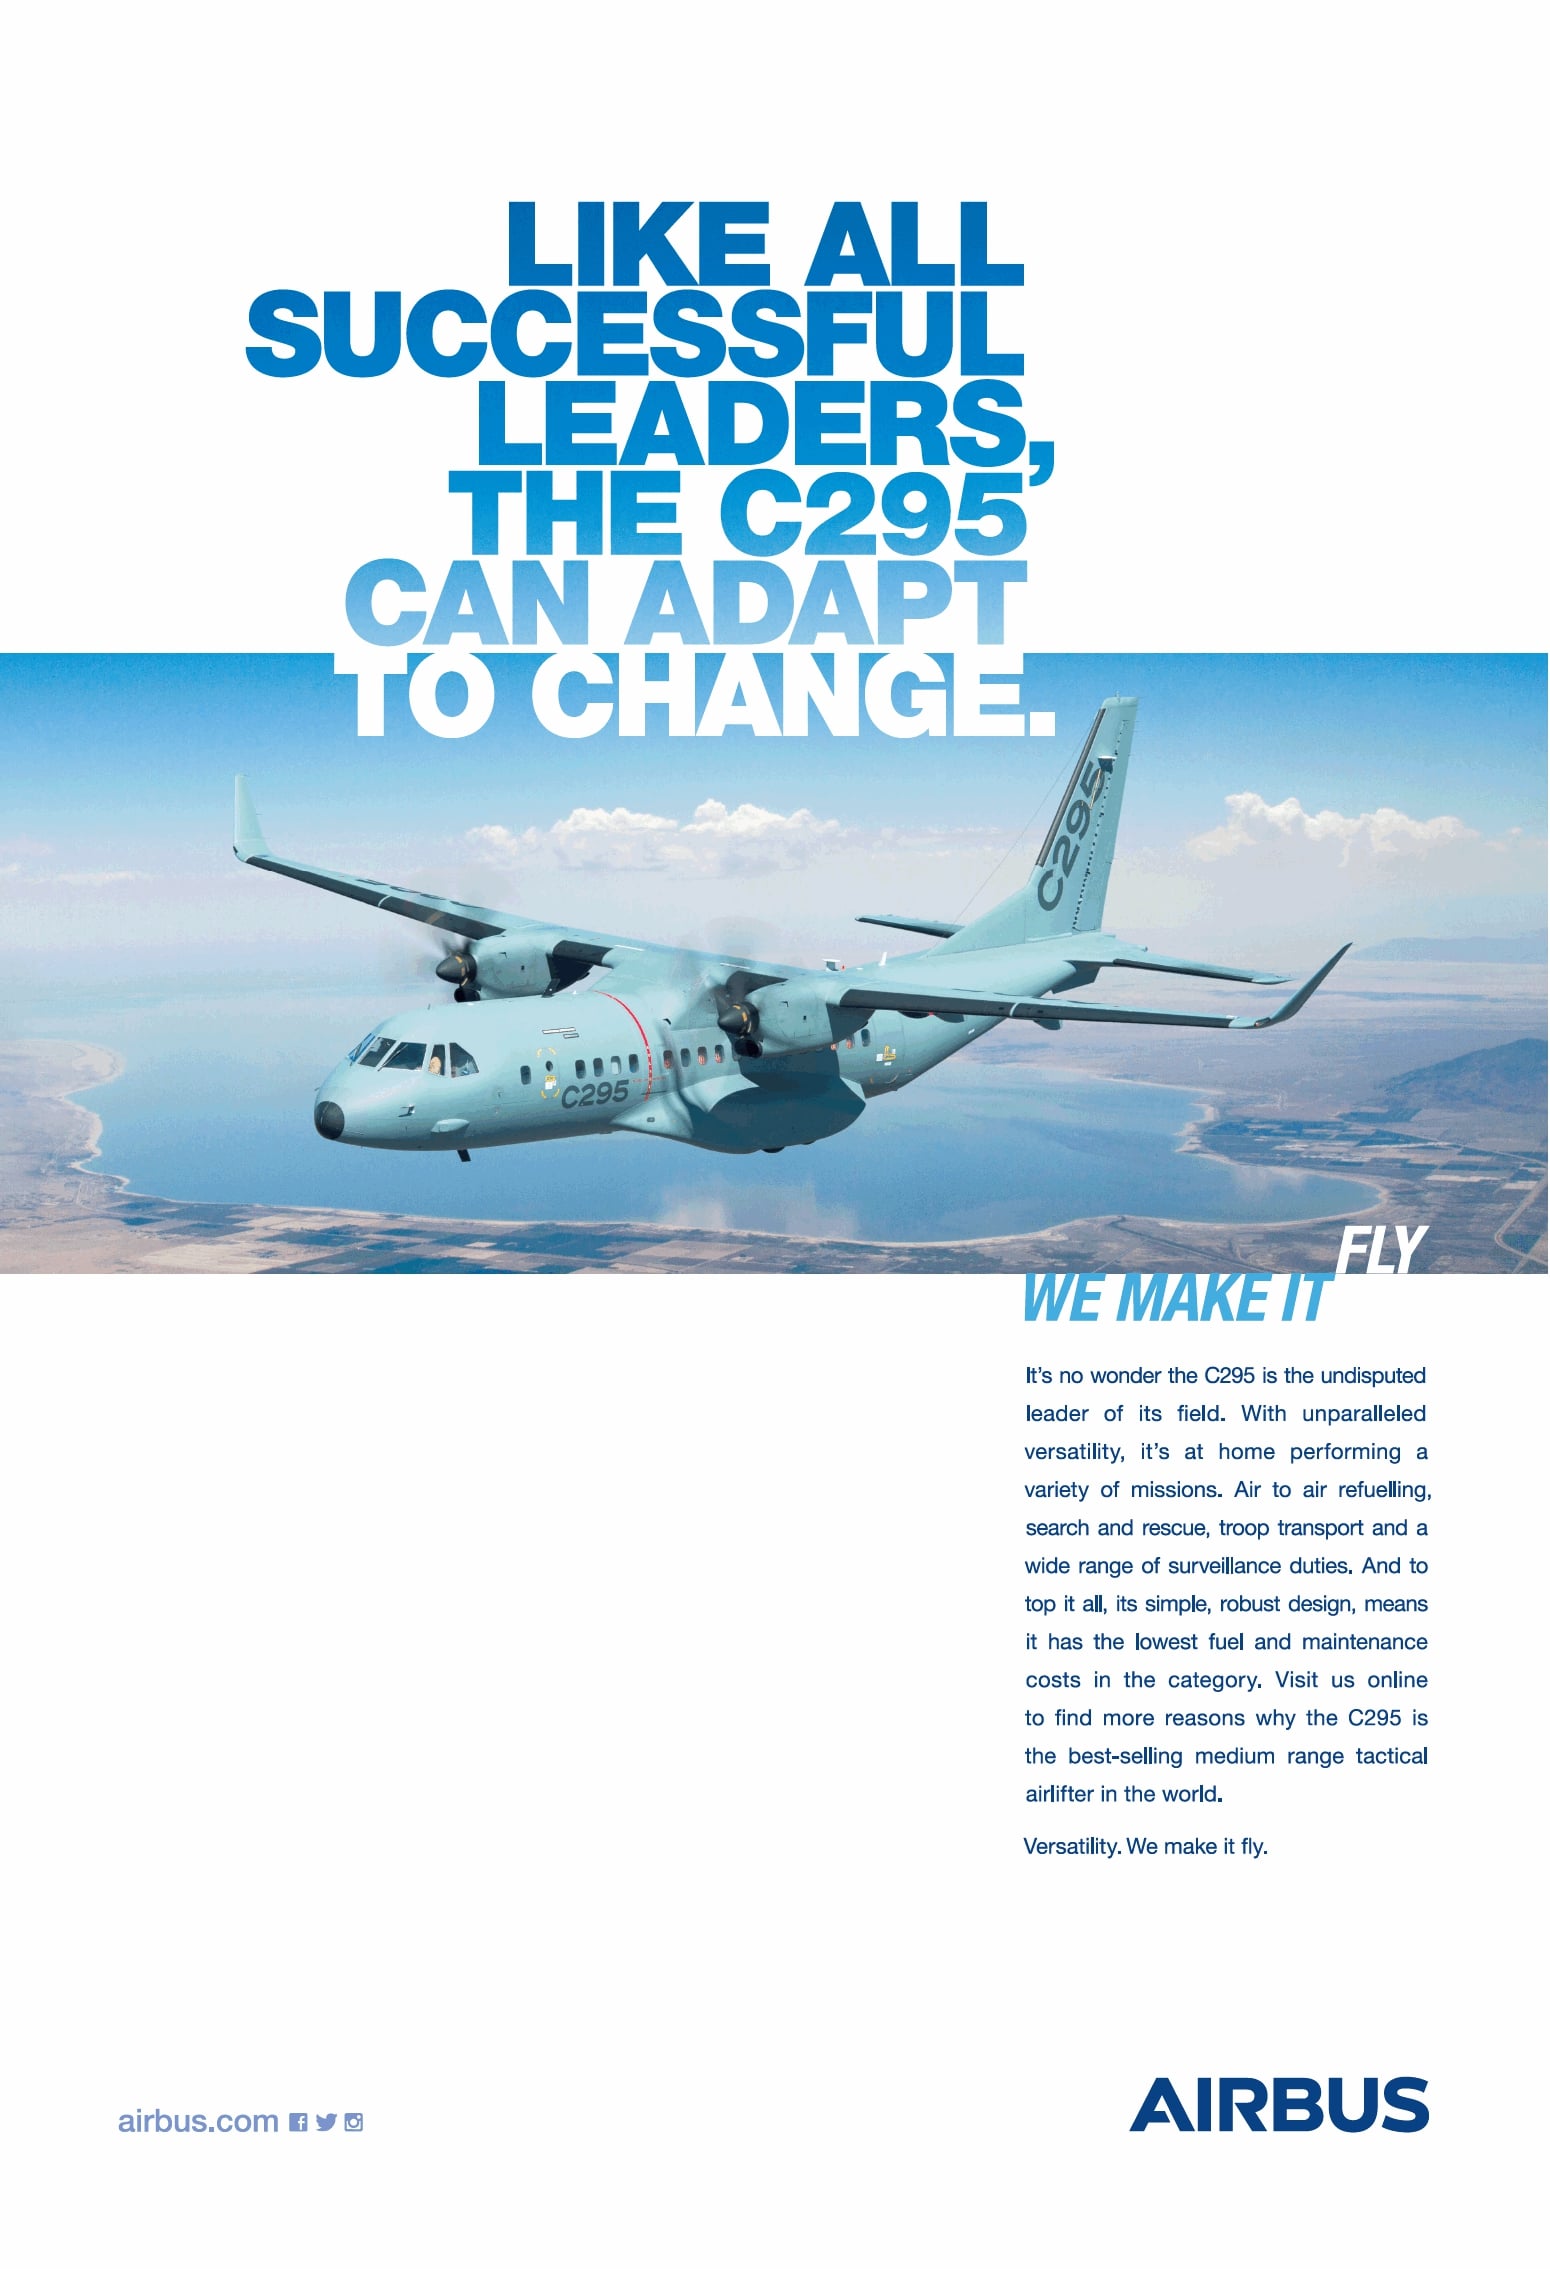 airbus-like-all-successful-leaders-the-c295-can-adapt-to-change-ad-times-of-india-bangalore-03-02-2021